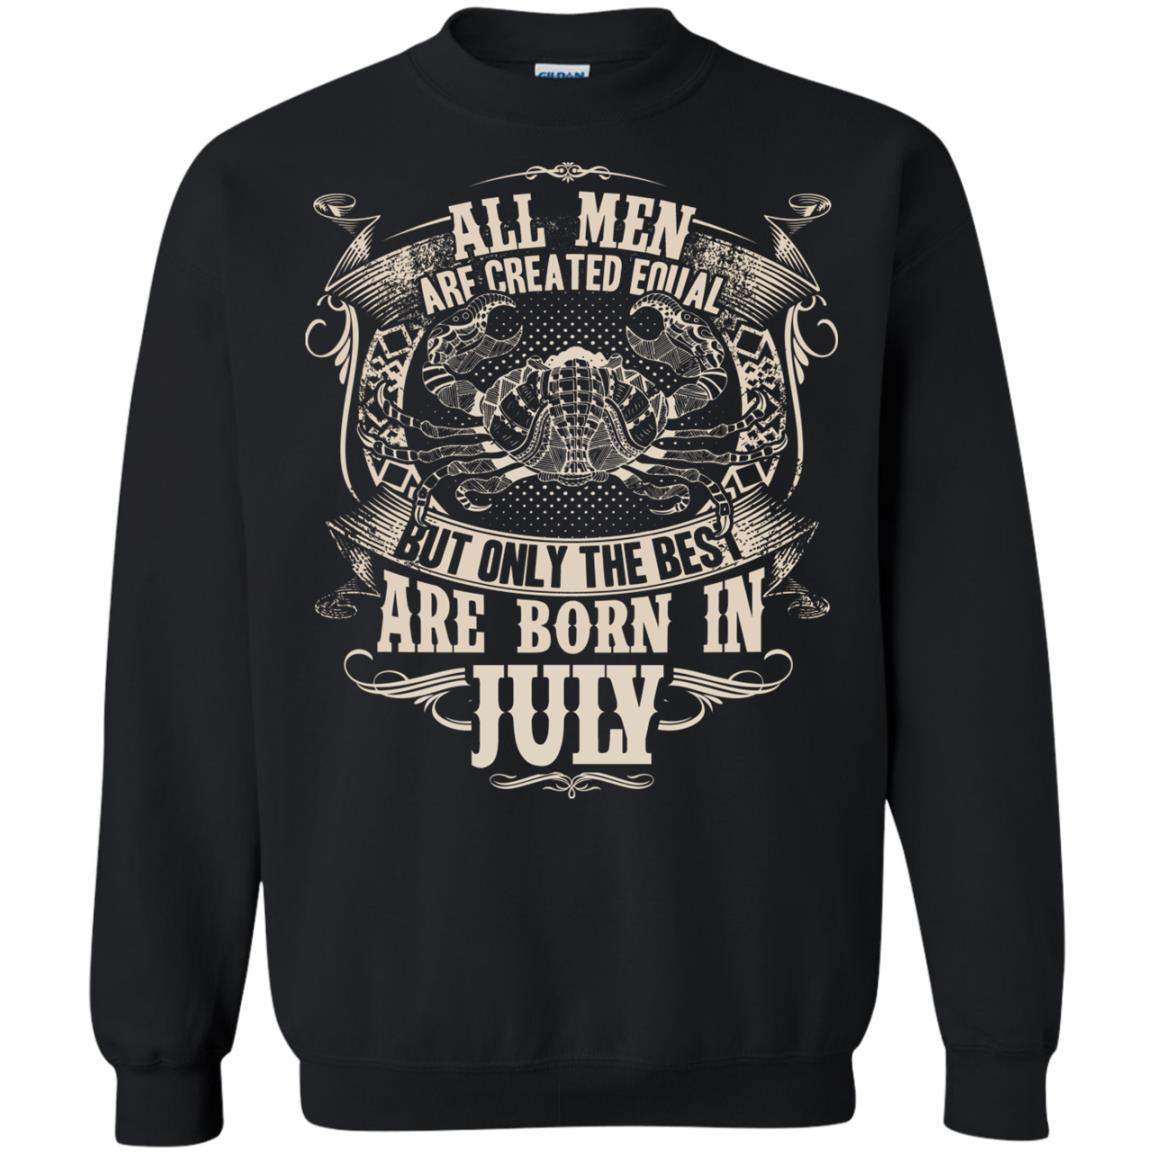 All Men Are Created Equal, But Only The Best Are Born In July T-shirtG180 Gildan Crewneck Pullover Sweatshirt 8 oz.